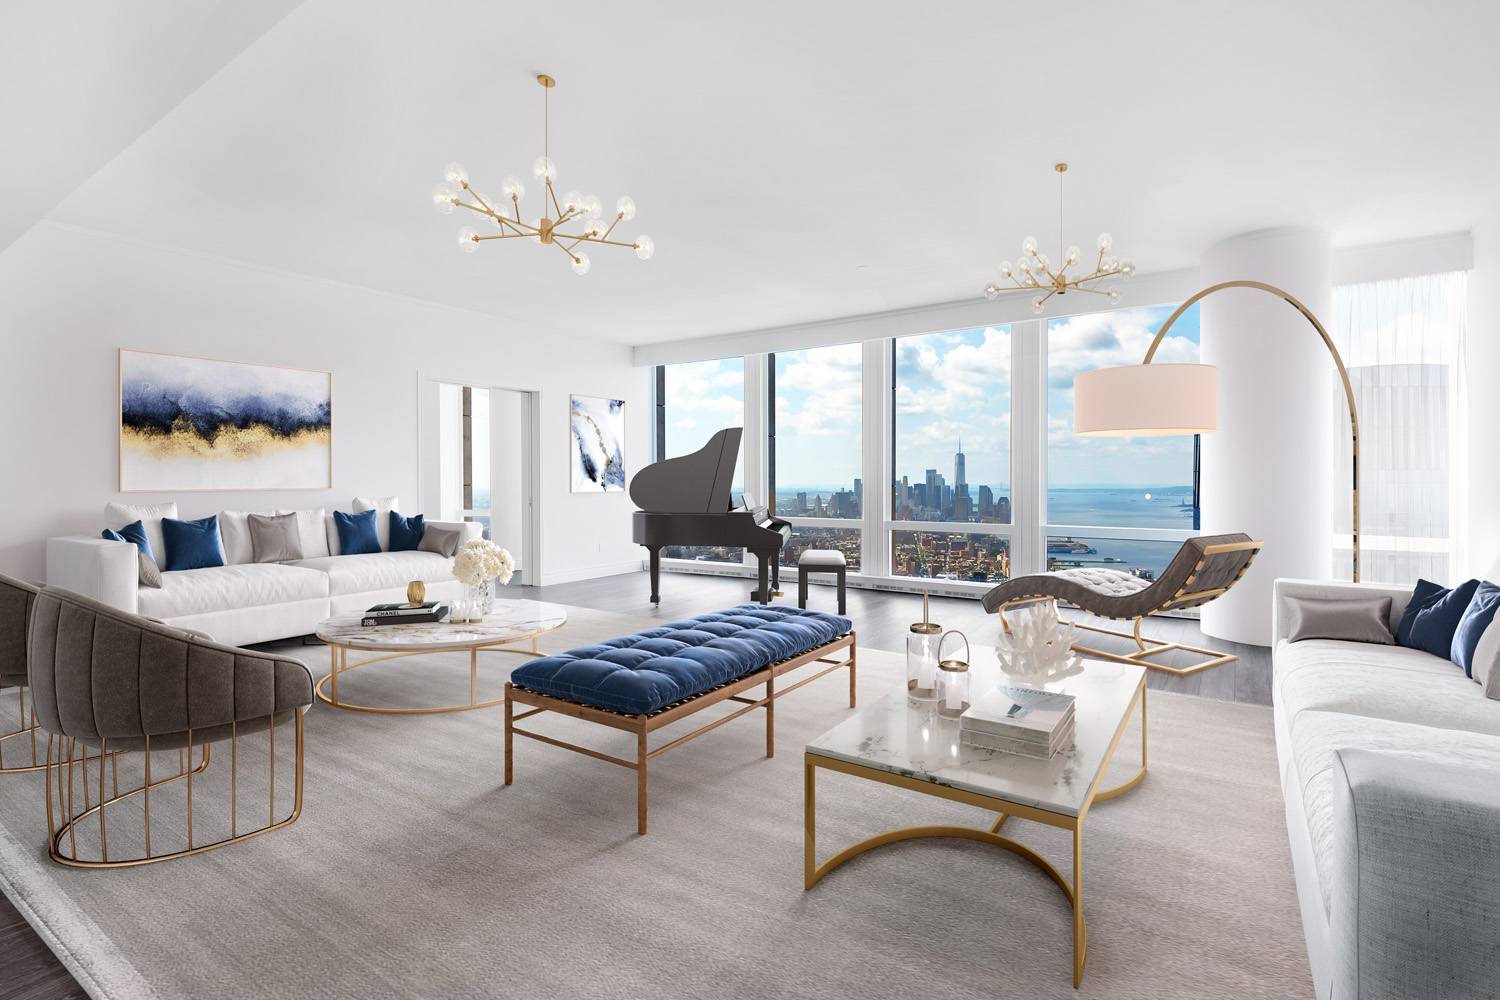 EXPERIENCE SWEEPING VIEWS OF THE HUDSON RIVER FROM THIS EXPANSIVE FIVE BEDROOM HOME SPANNING THE ENTIRE SOUTHERN FACADE OF THE BUILDING.